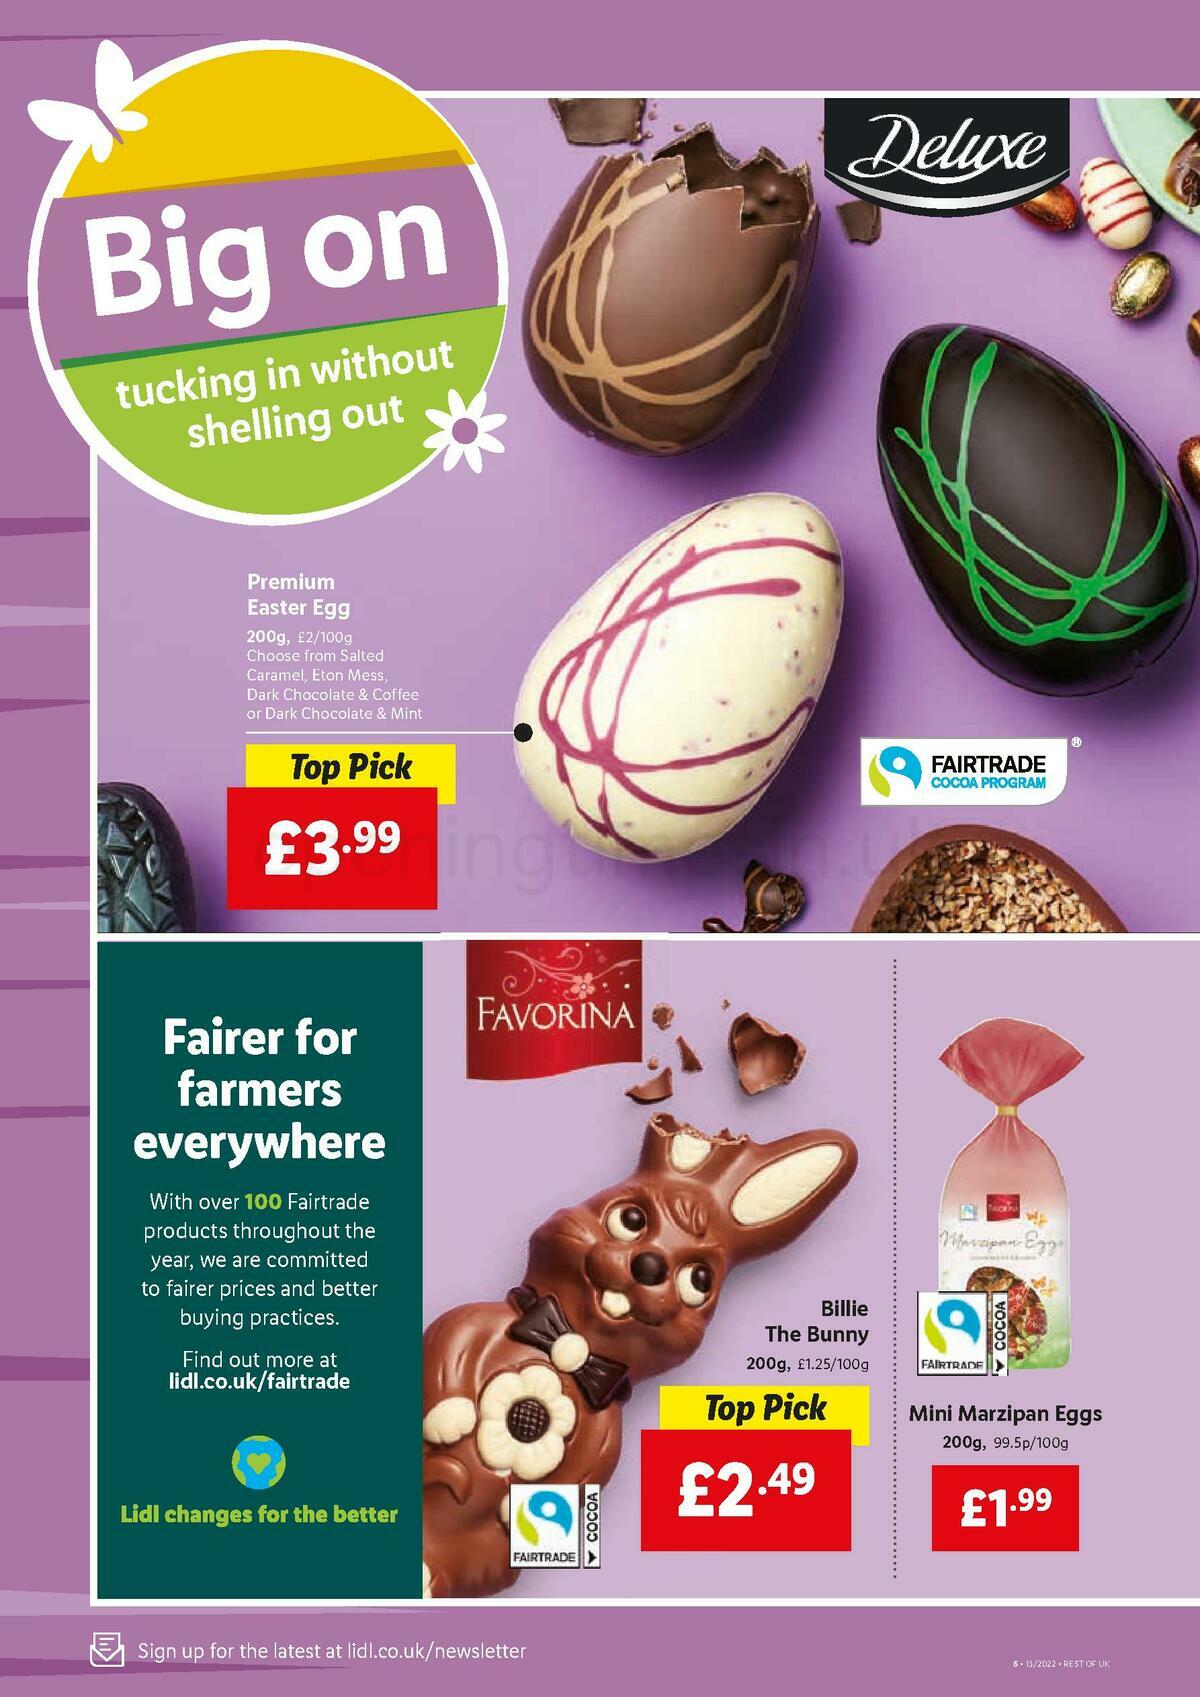 LIDL Offers from 31 March